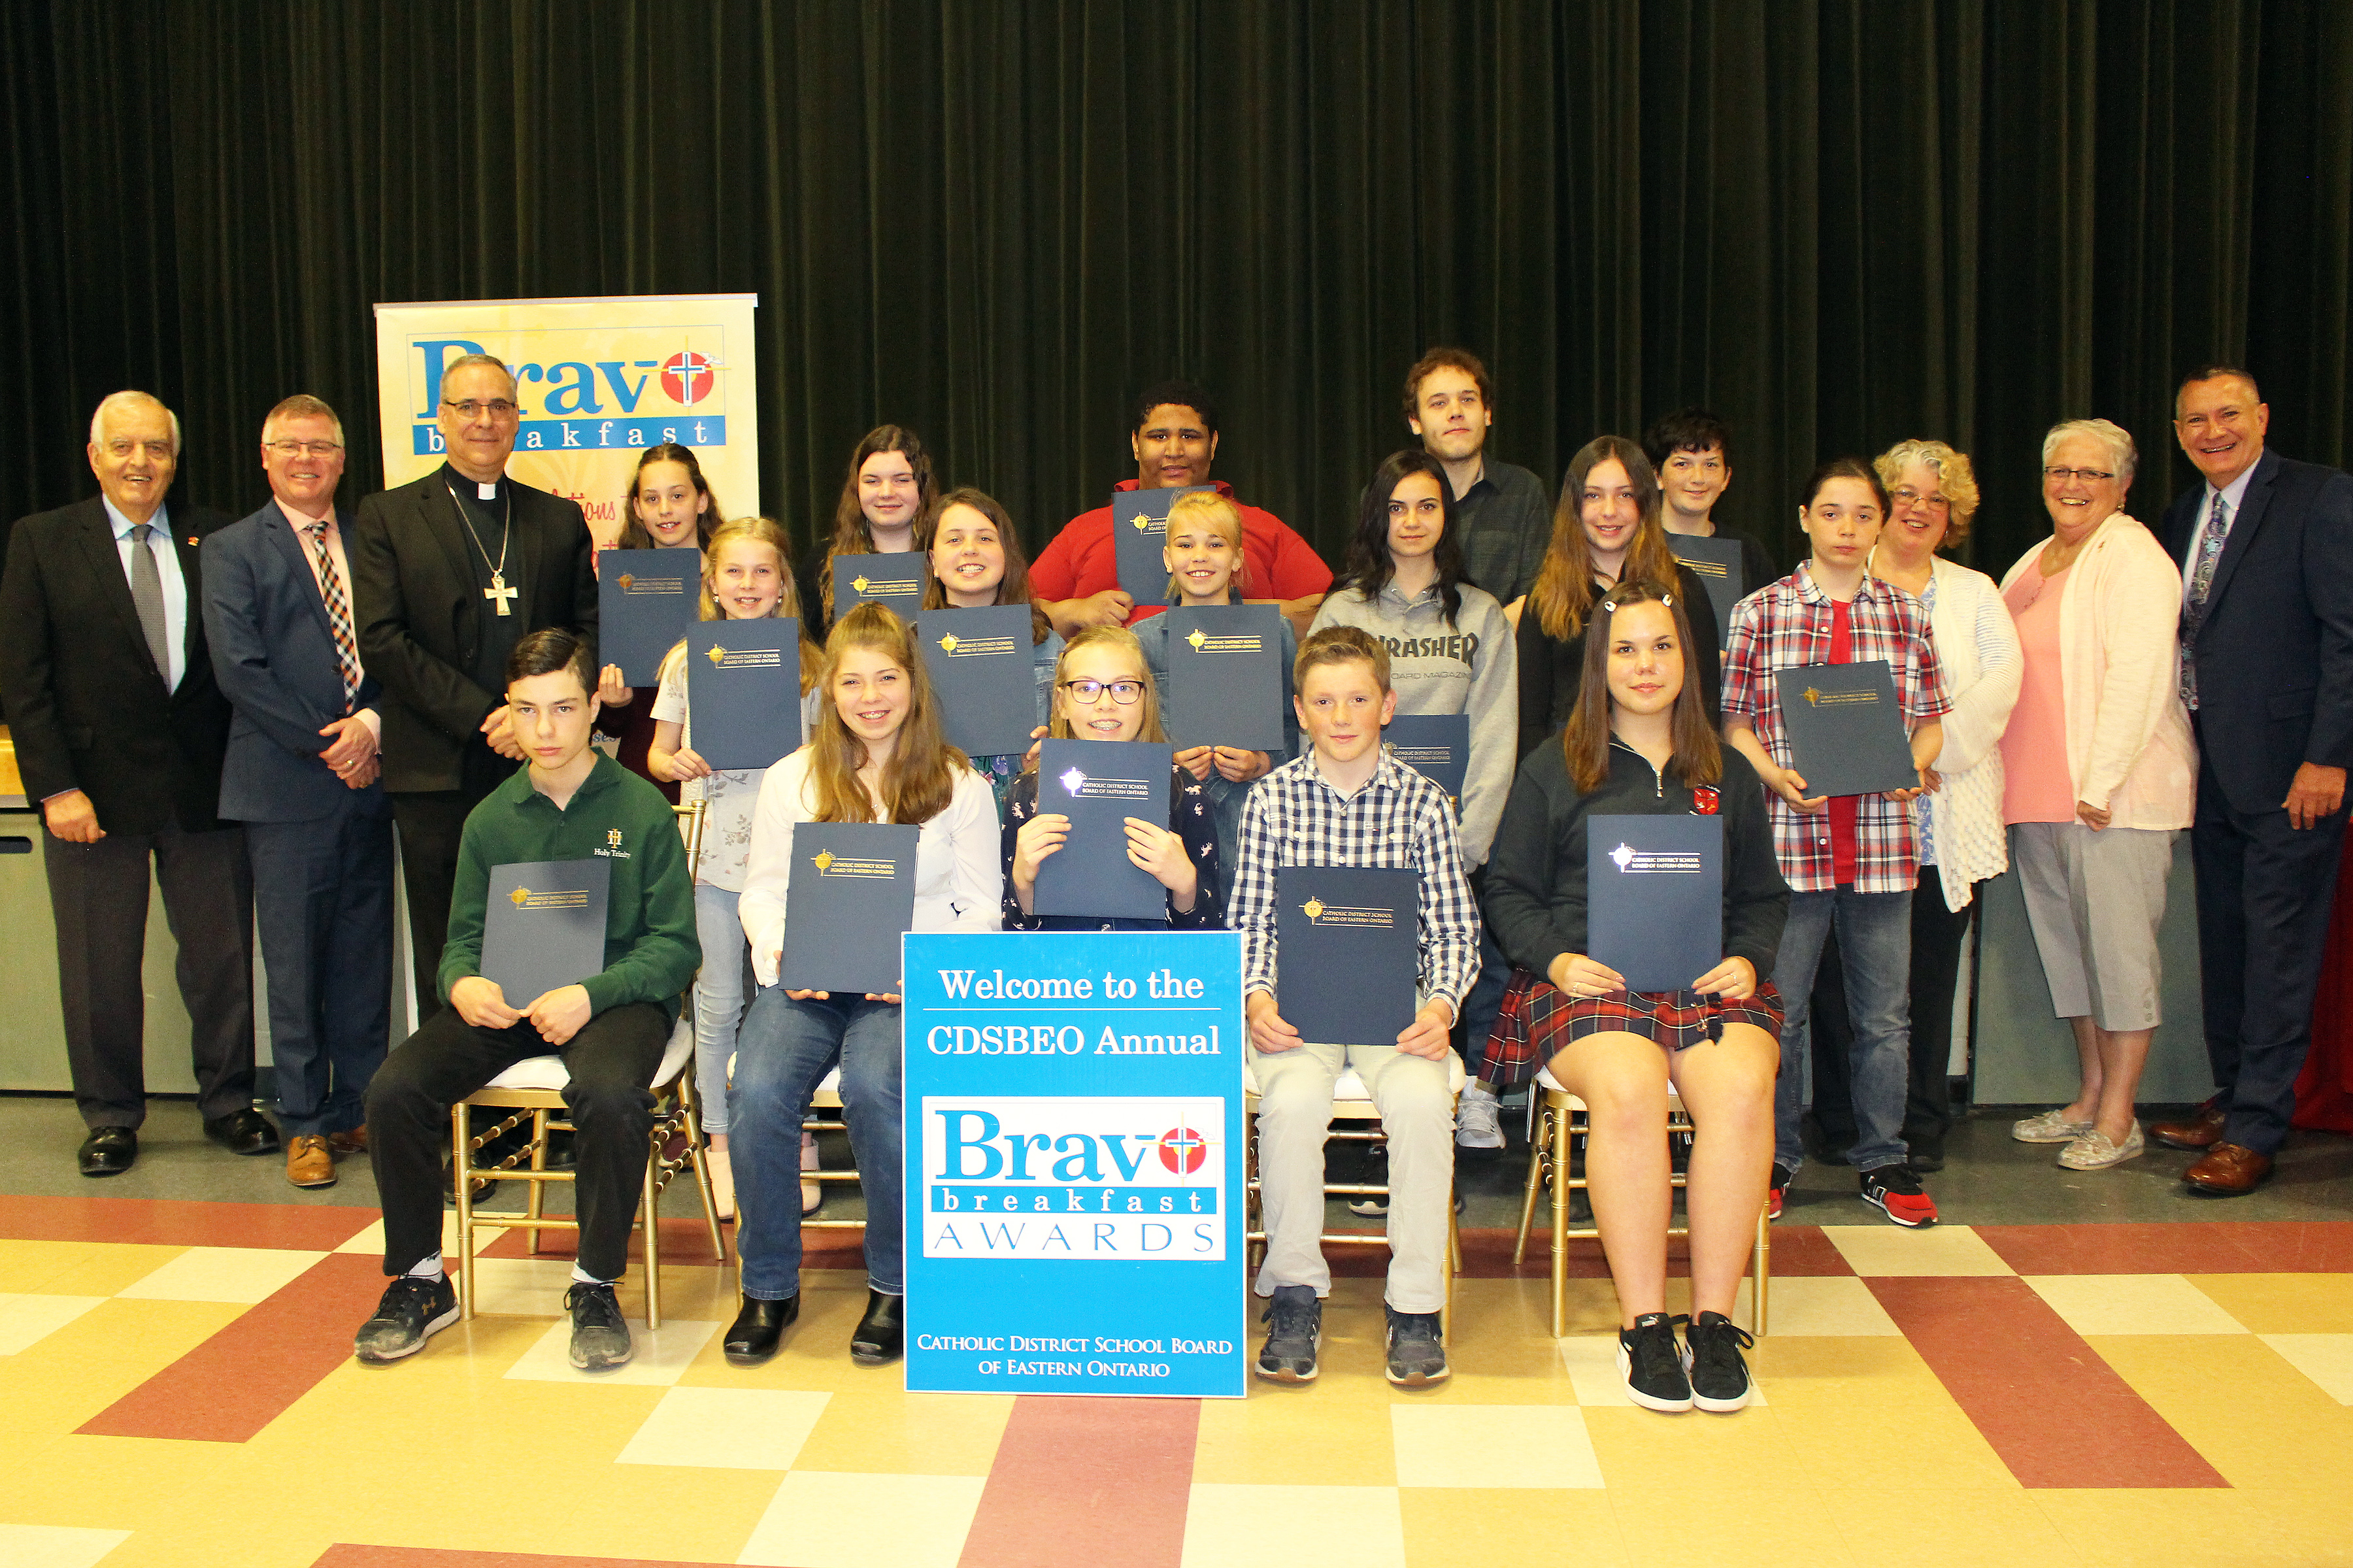 Students stand with their awards, along with board trustees, administrators, and Bishop Desroches.